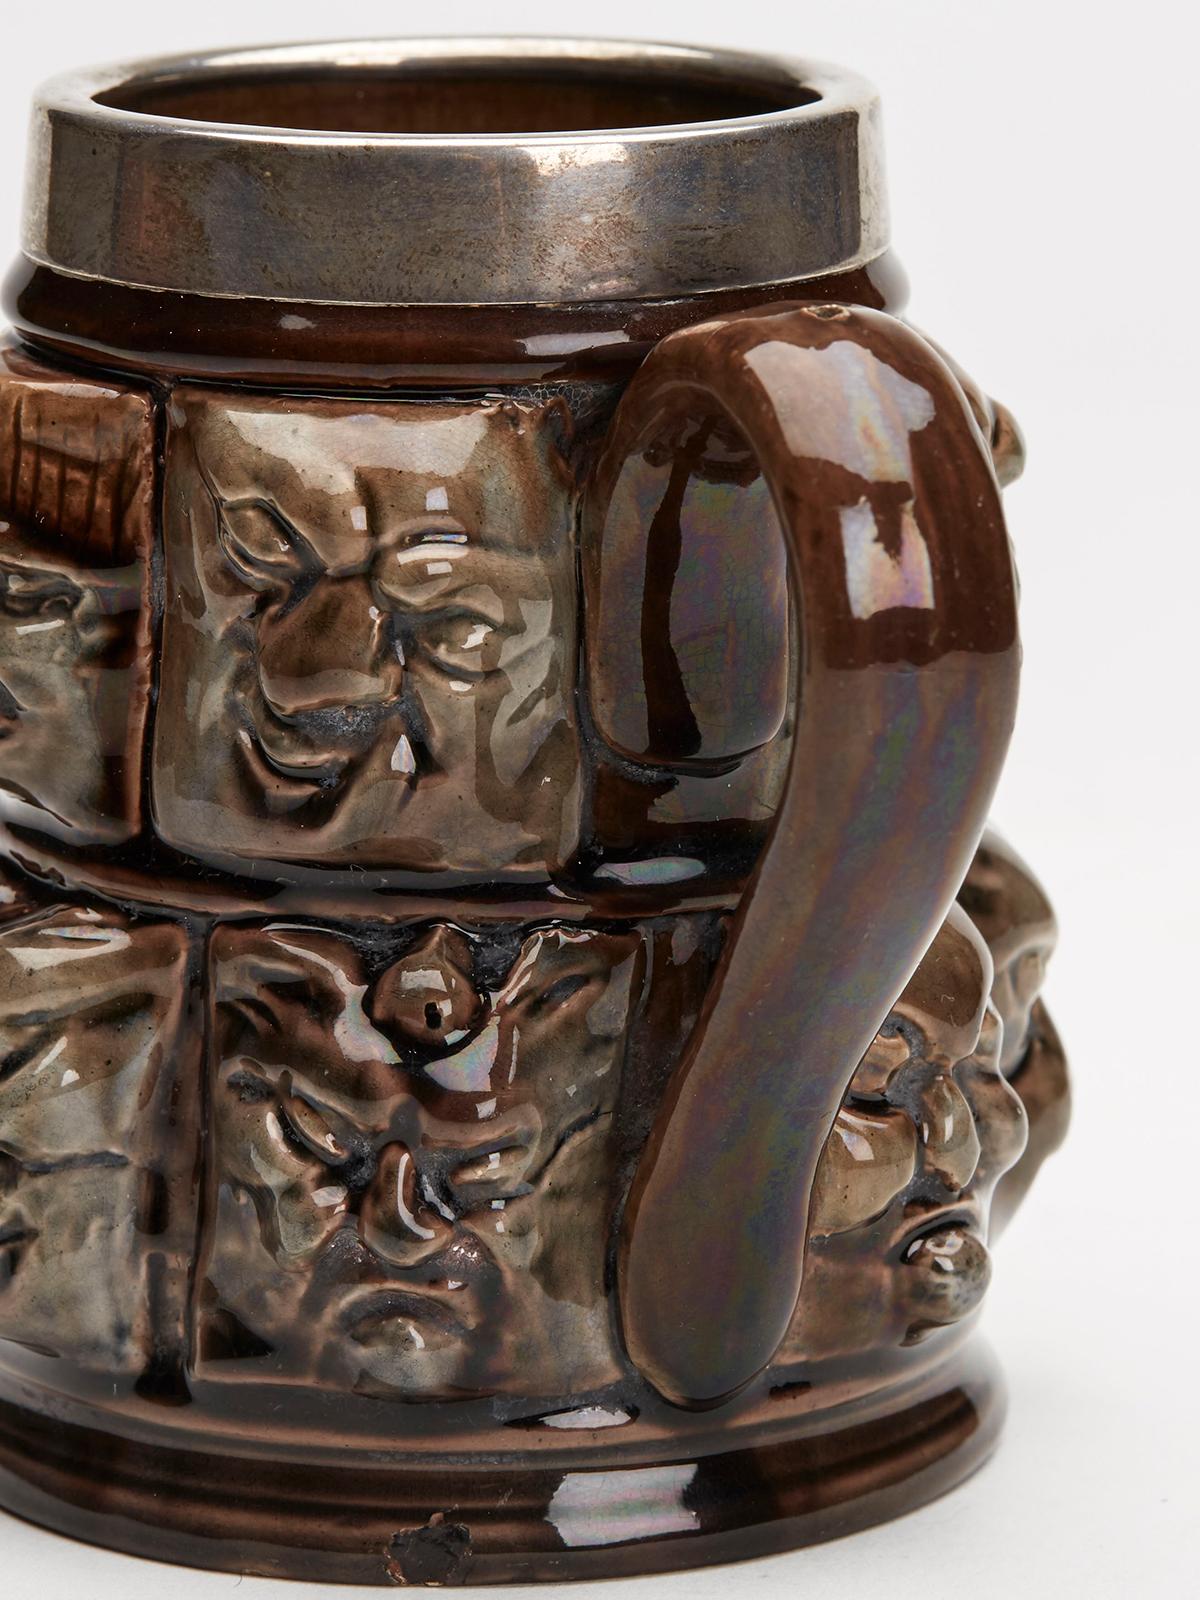 A very unusual Aesthetic Movement art pottery silver mounted mug modeled in relief with thirteen grotesque faces and dating from around 1880. The finely potted mug is heavily relief molded with thirteen square panels each modeled as a grotesque